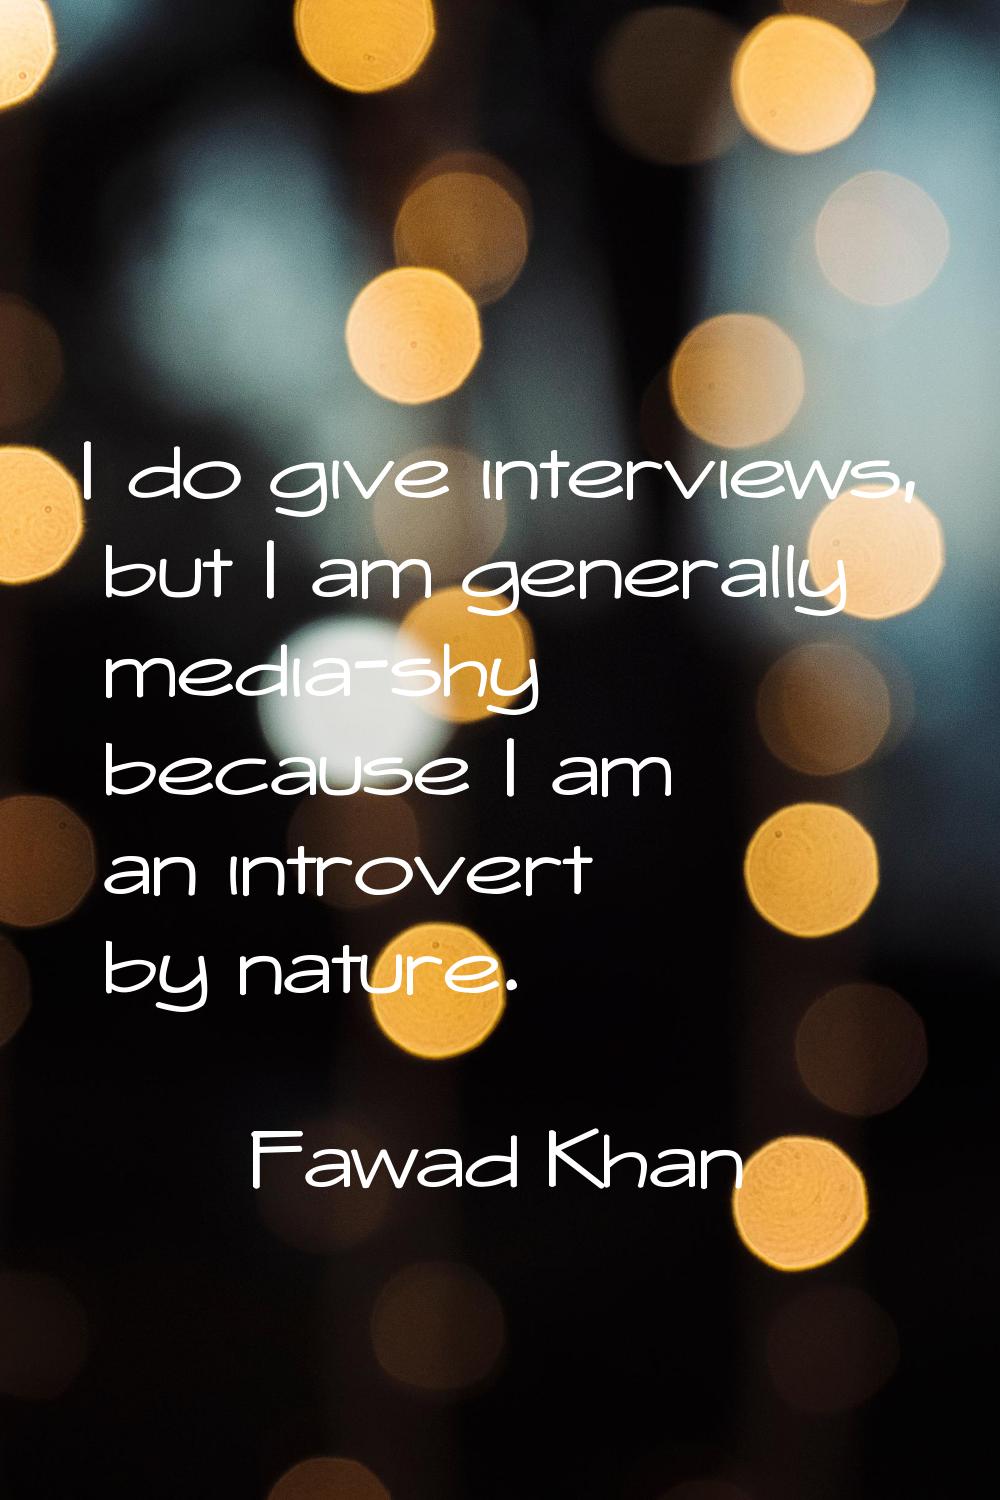 I do give interviews, but I am generally media-shy because I am an introvert by nature.